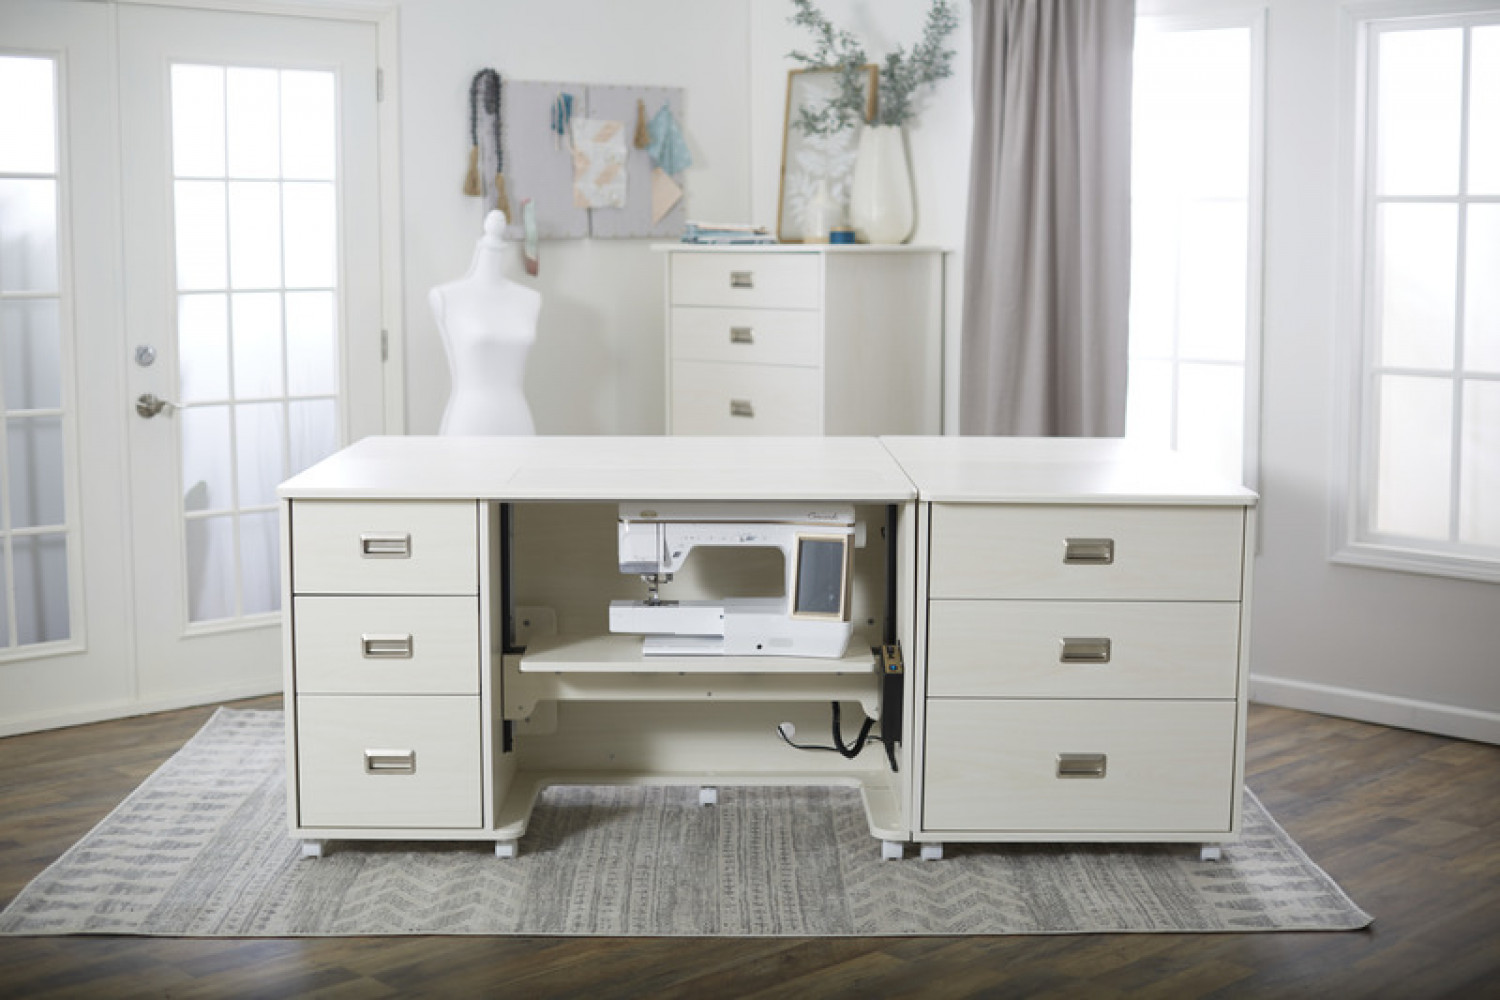 The Koala Artistry Drawer Center with Three Drawer Caddy